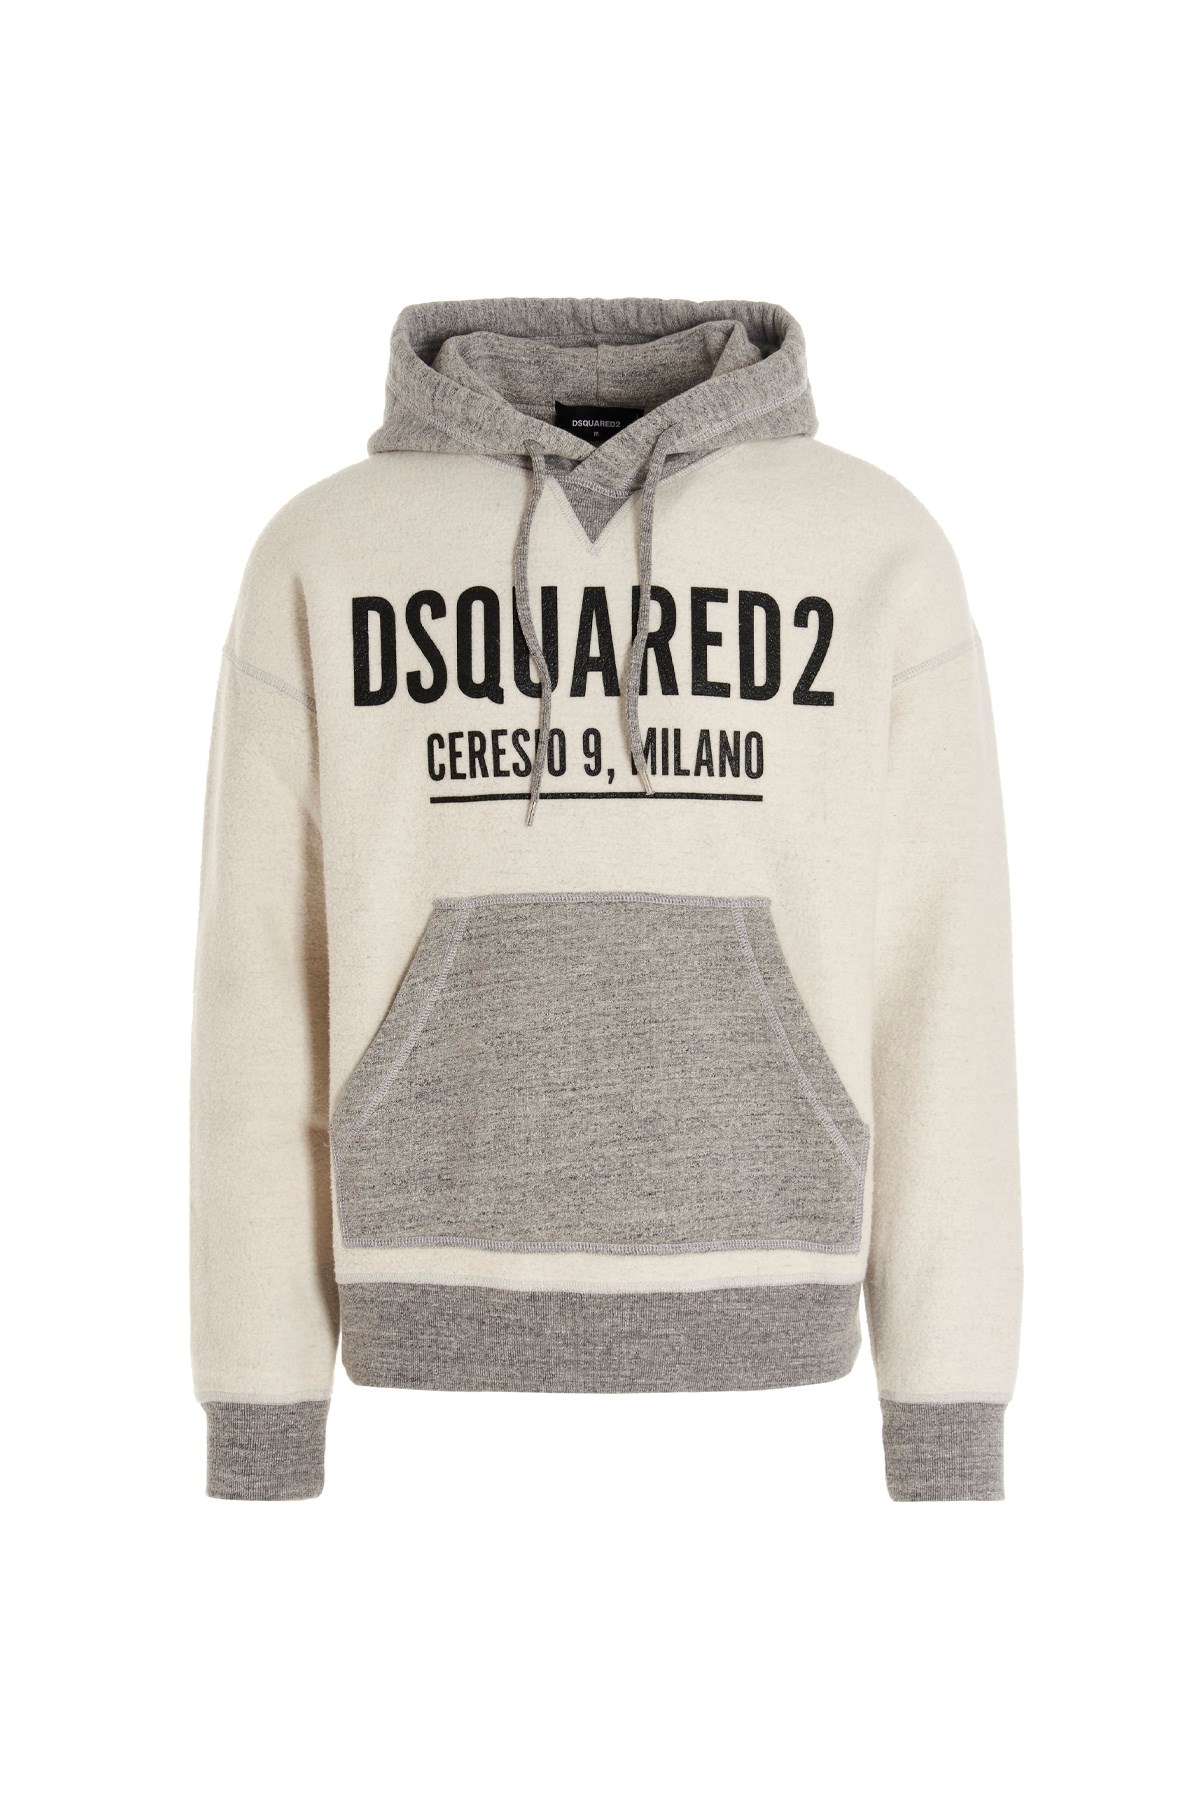 DSQUARED2 'Ceresio9 Mike’ Hoodie